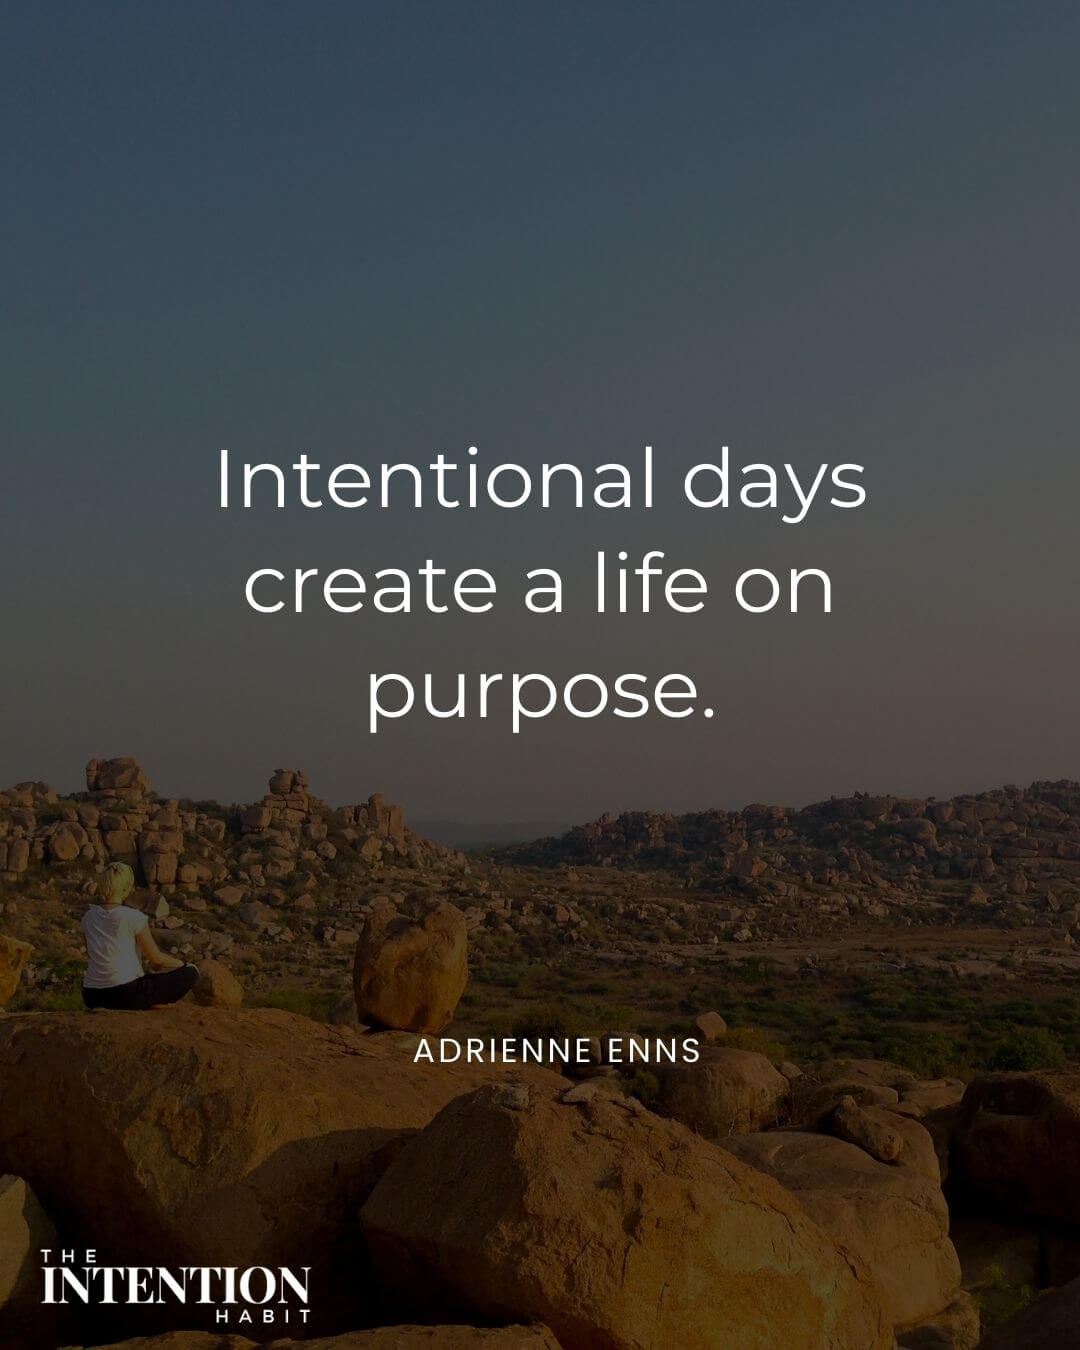 Intentional living quote - intentional days create a life on purpose